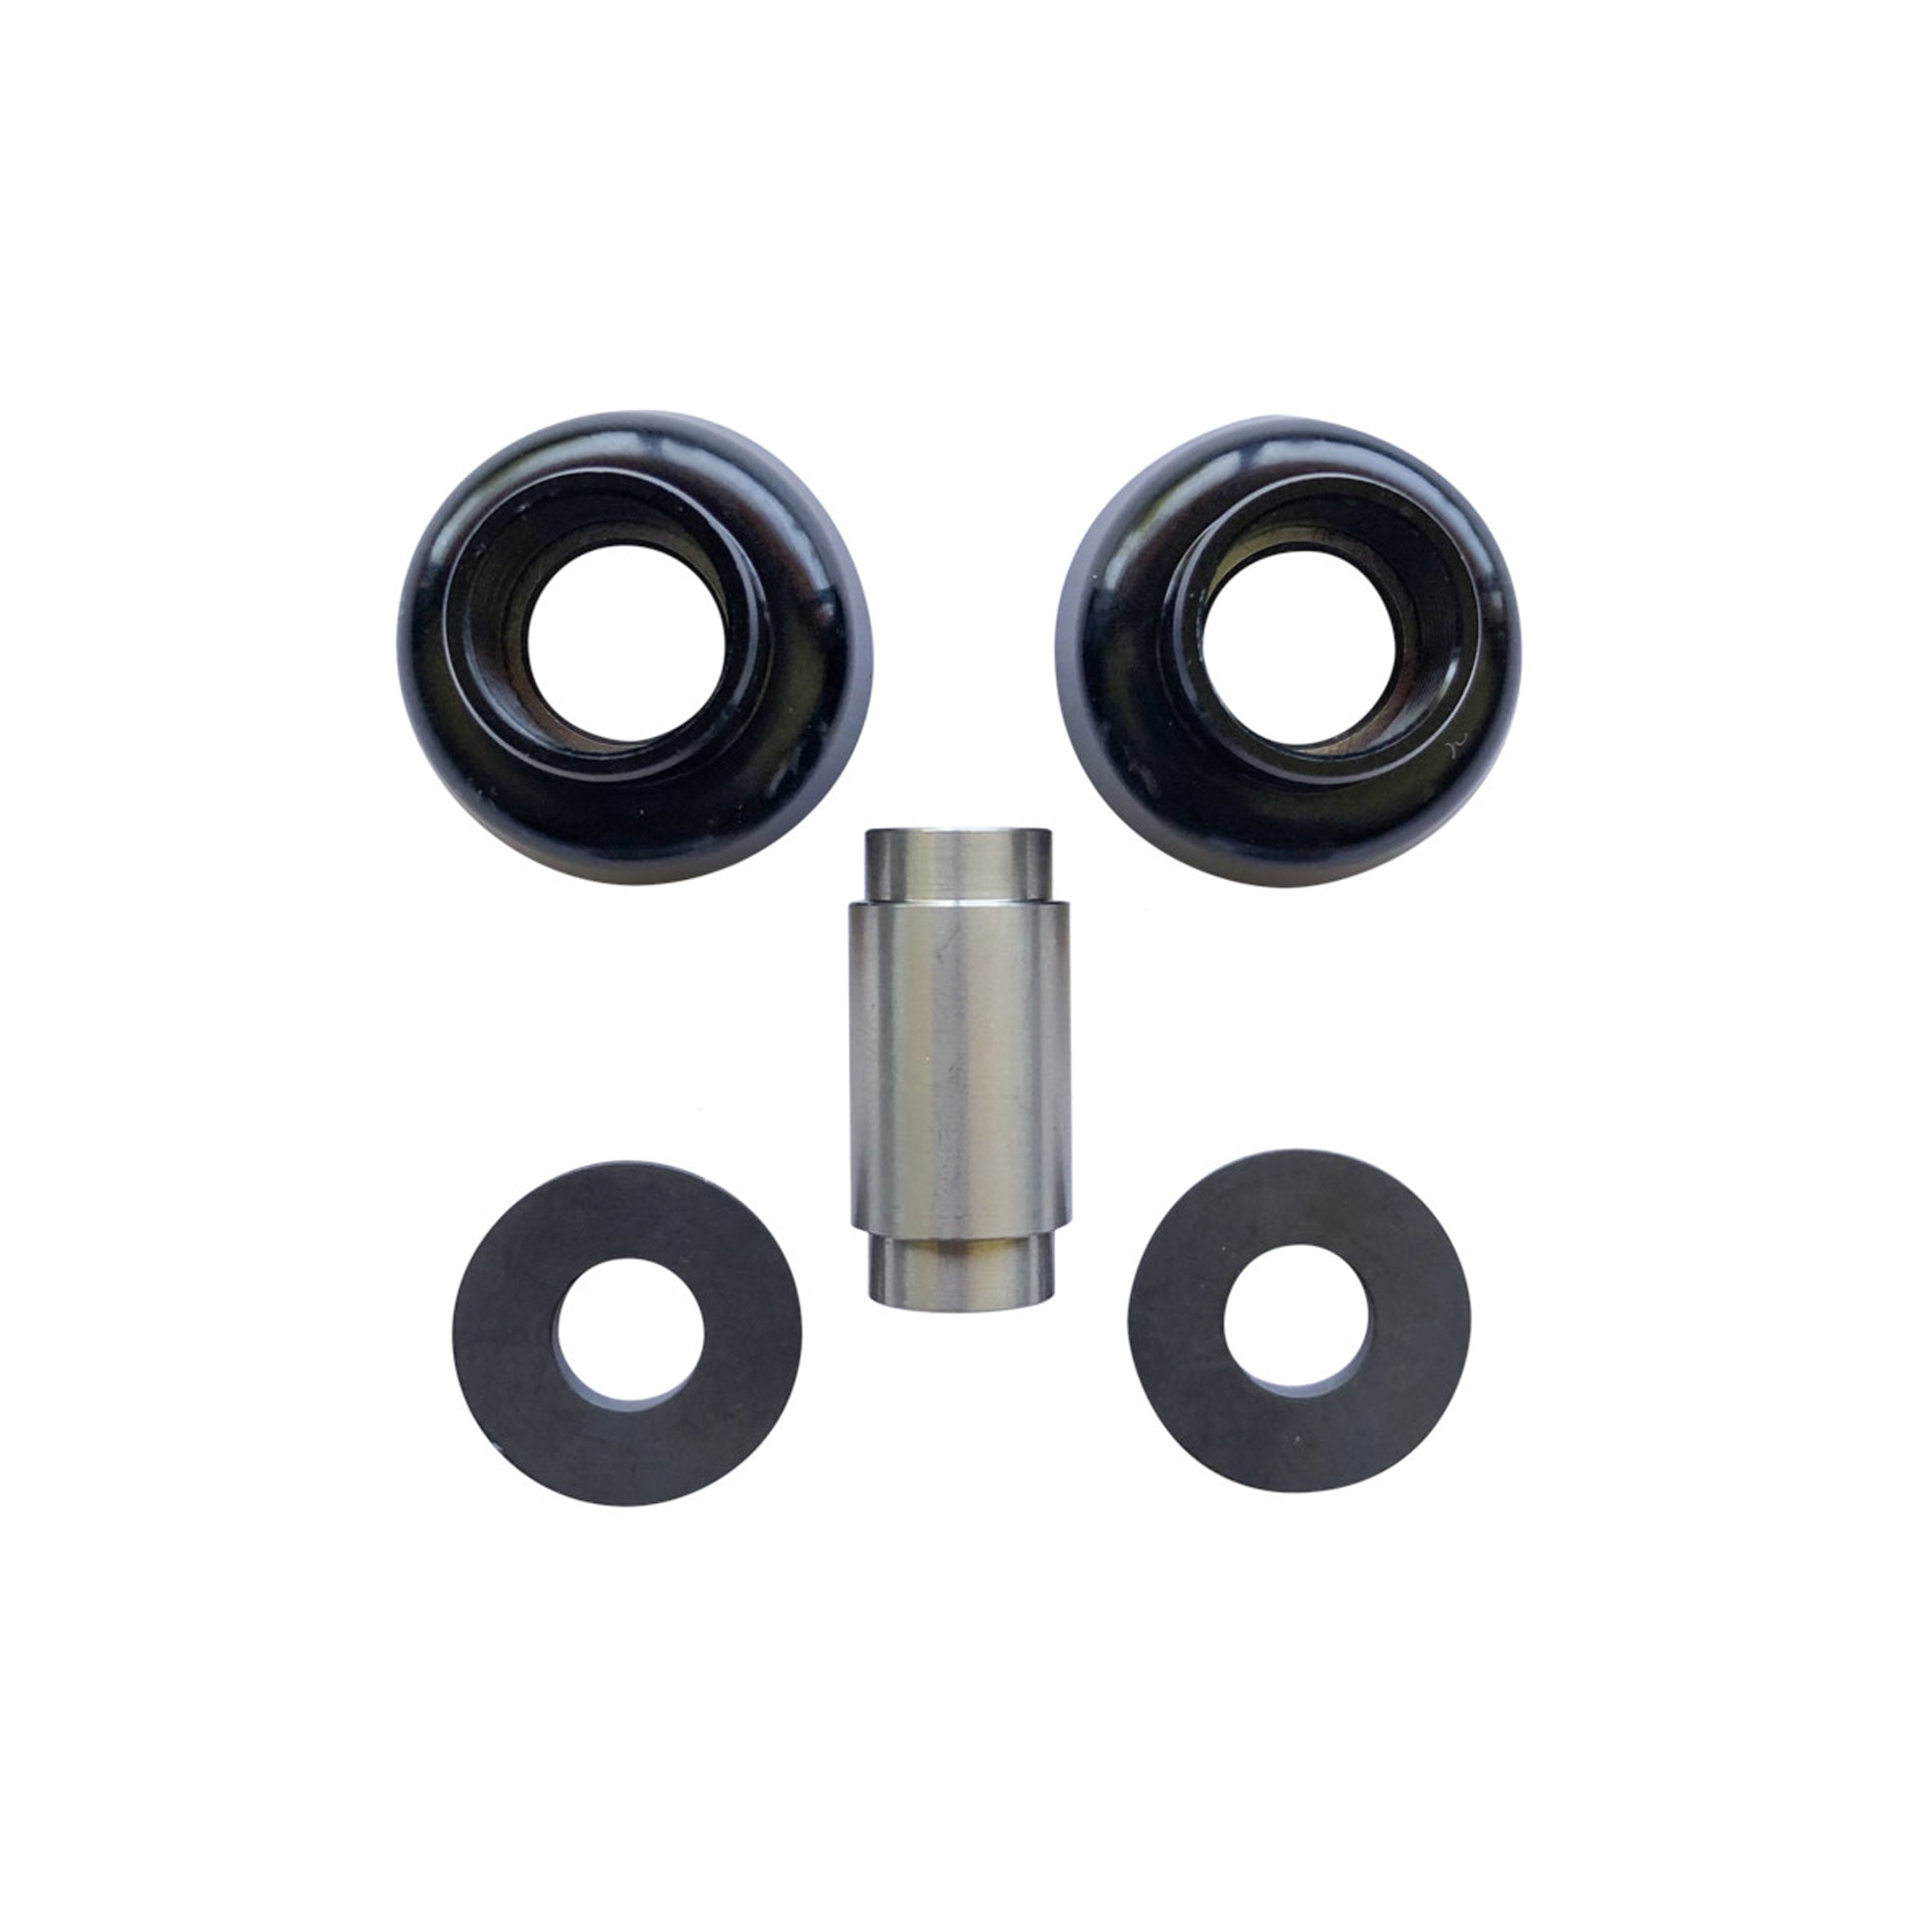 Fox Mounting Hardware Roller Full Complement 30mm Wide 8mm Diameter Rear Bike Suspension Shock Spare Part